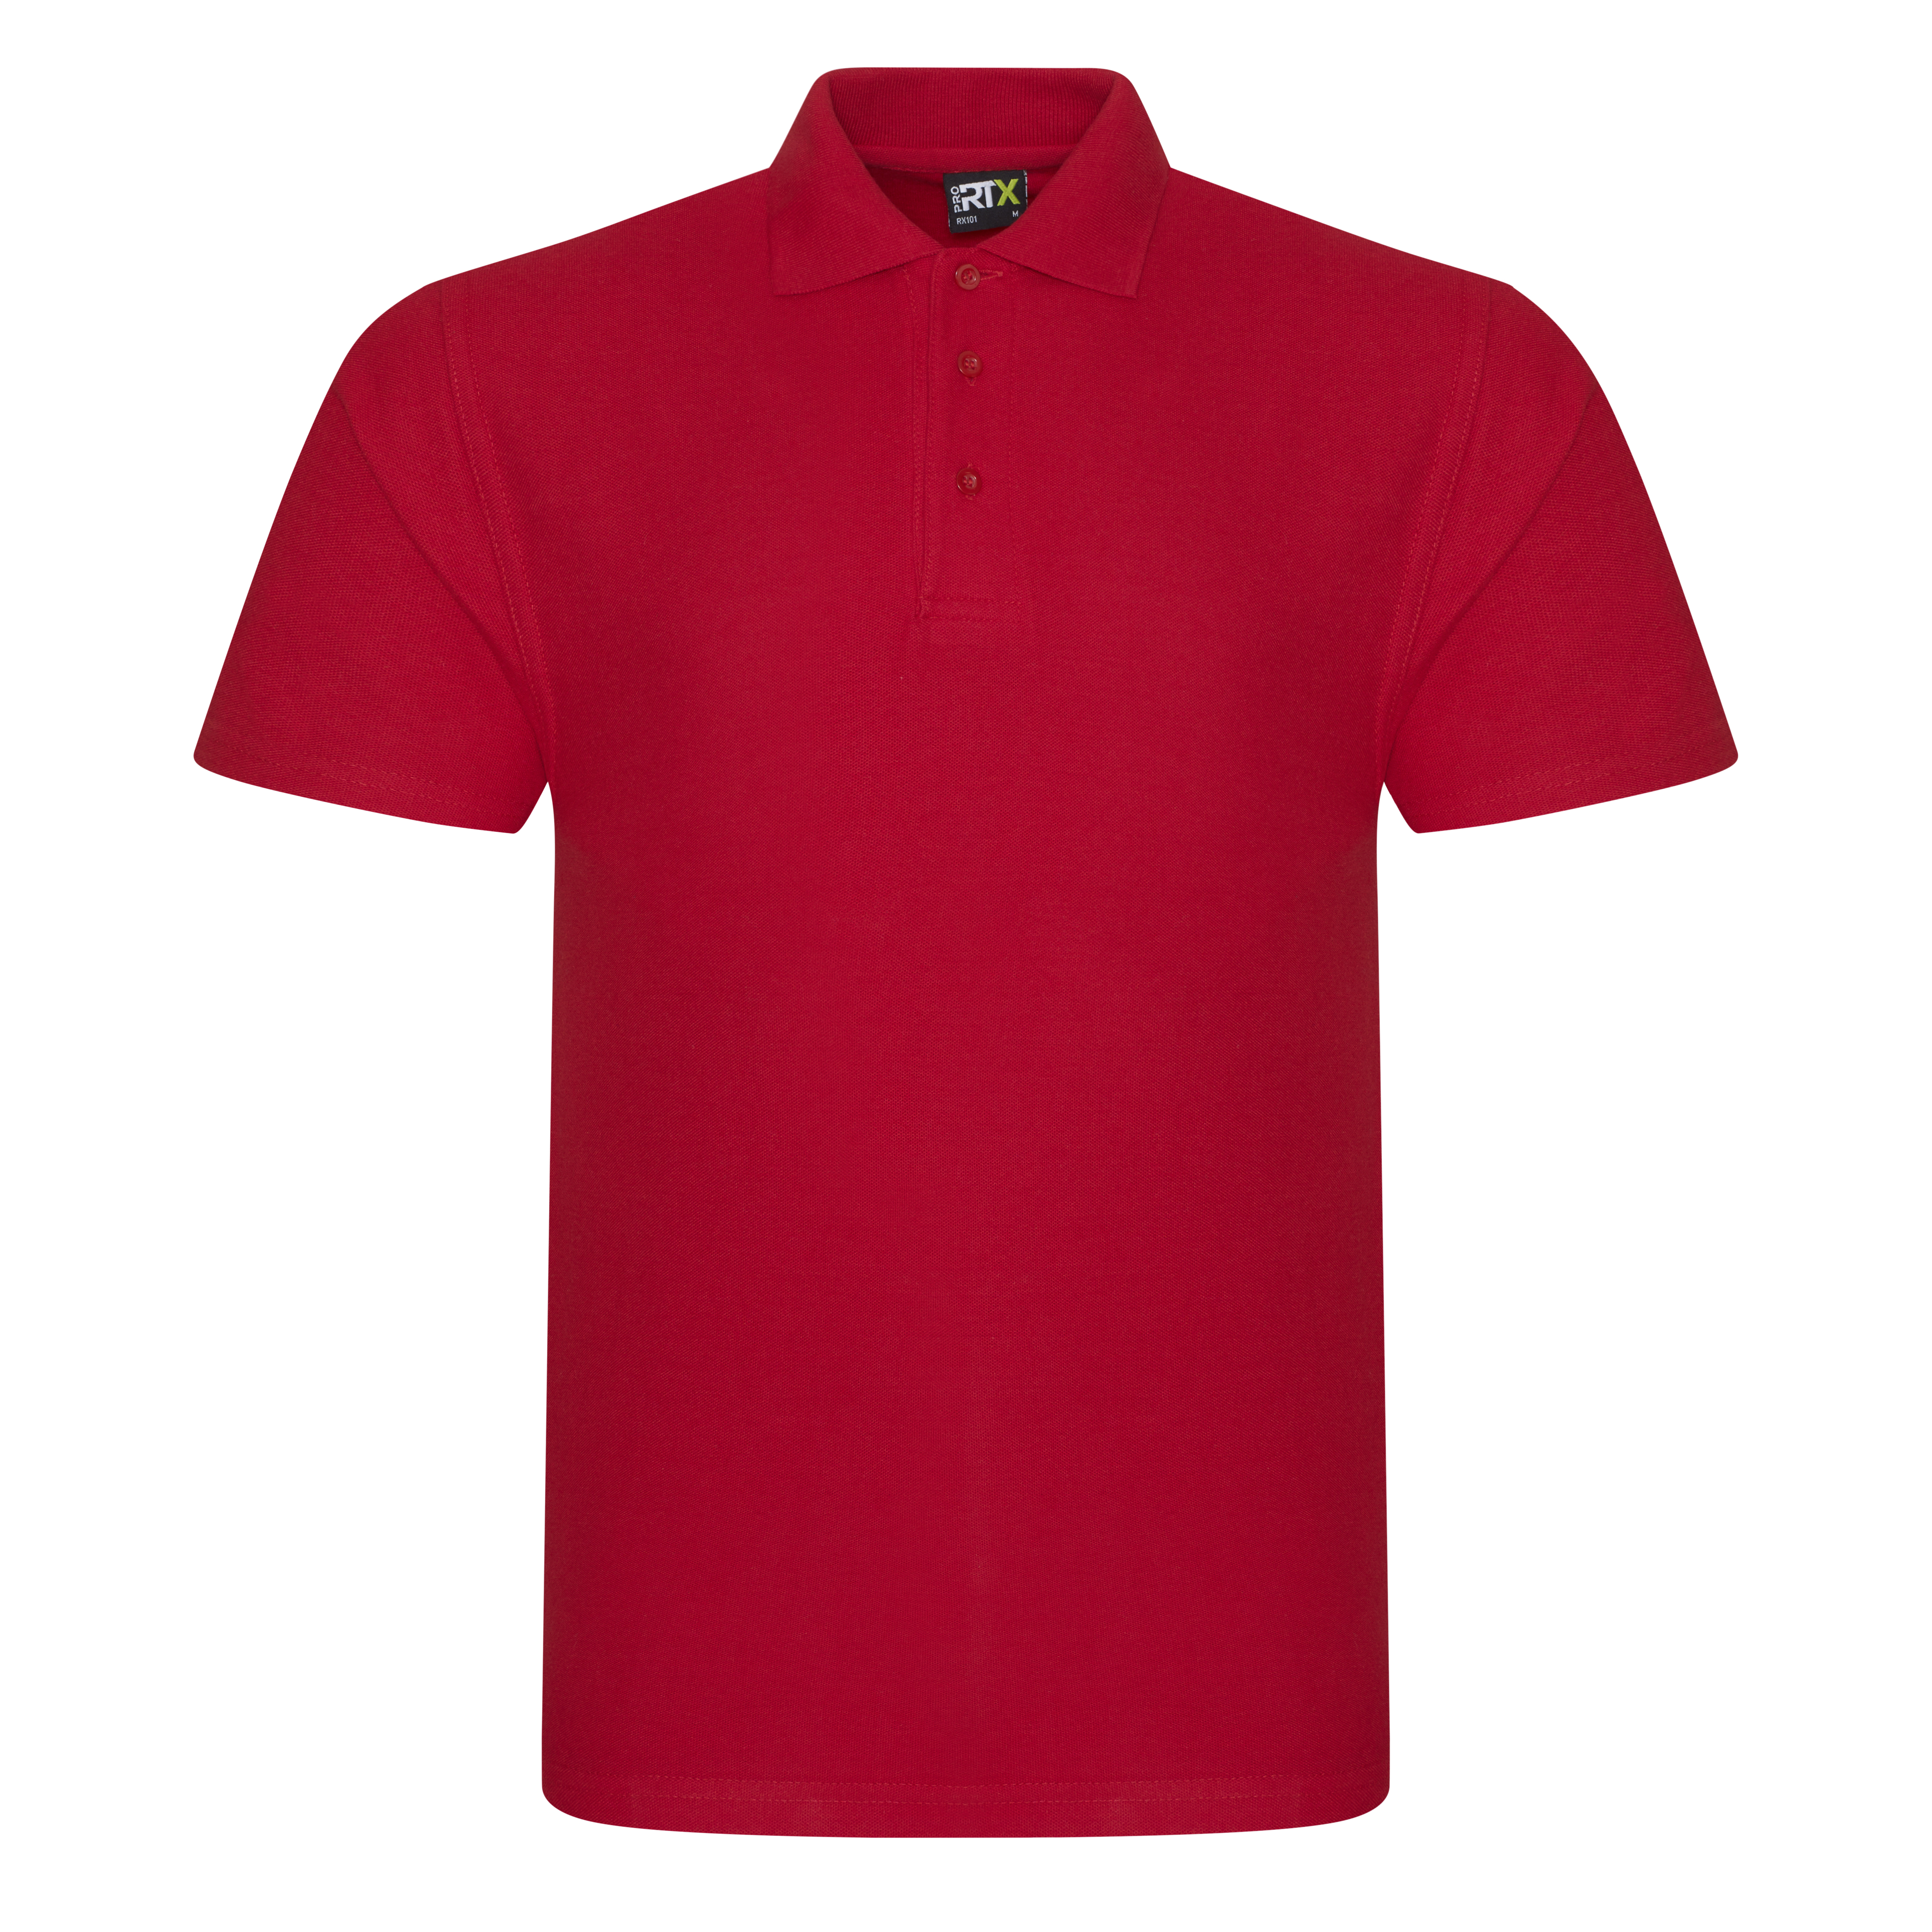 ax-httpswebsystems.s3.amazonaws.comtmp_for_downloadpro-polo-red.jpg